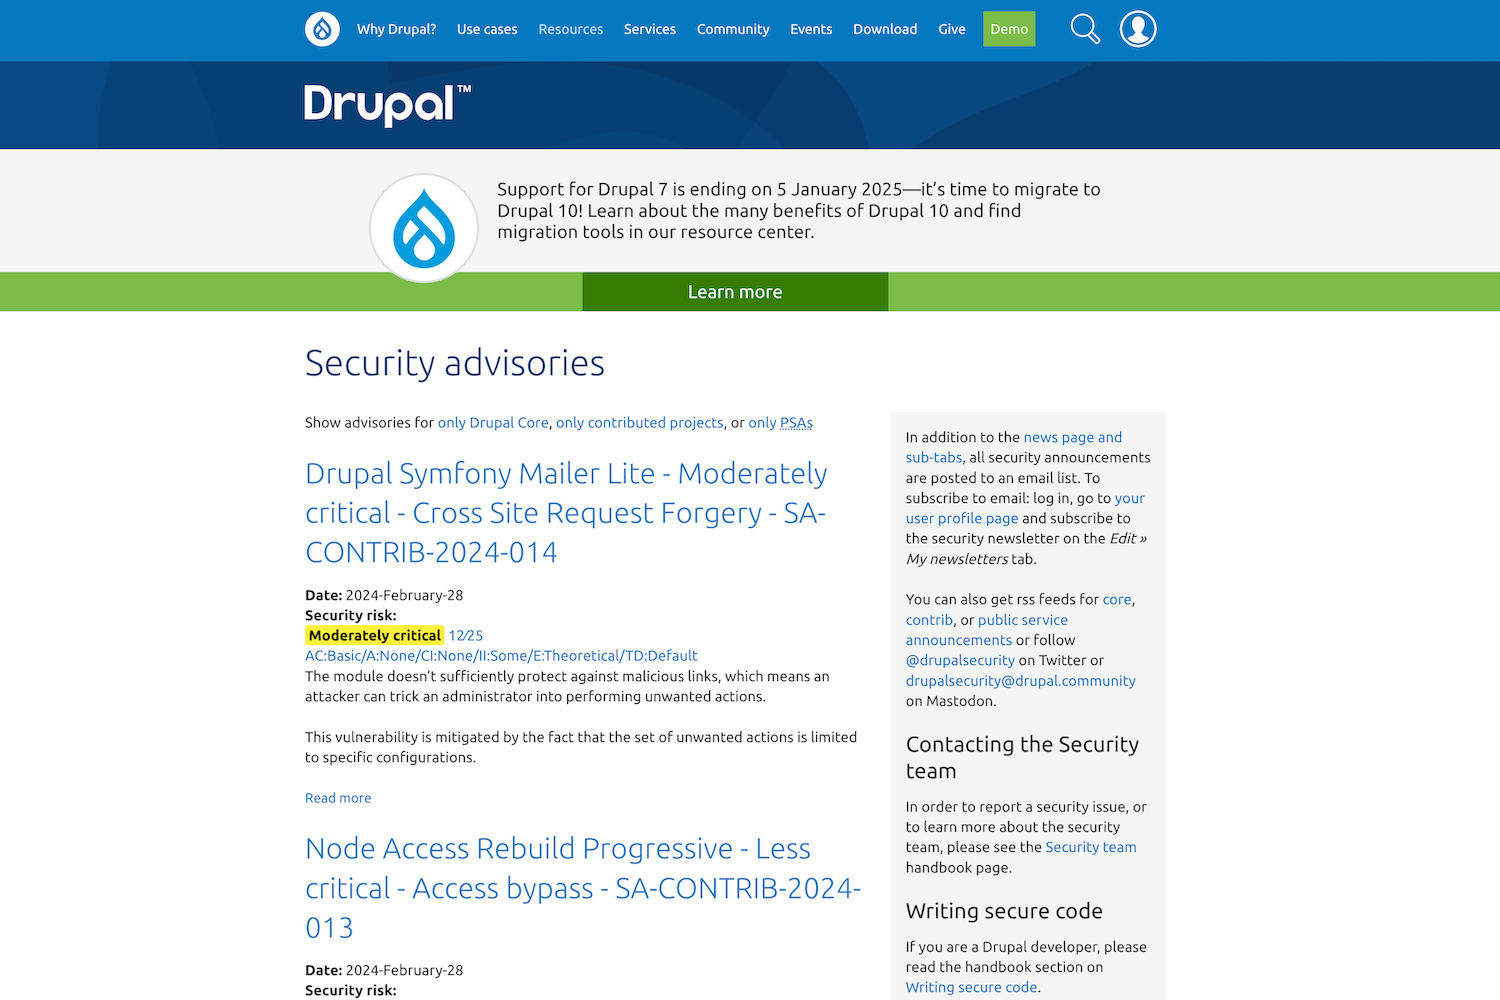 At Drupal.org, users can find valuable tips, advice, and news regarding website security.